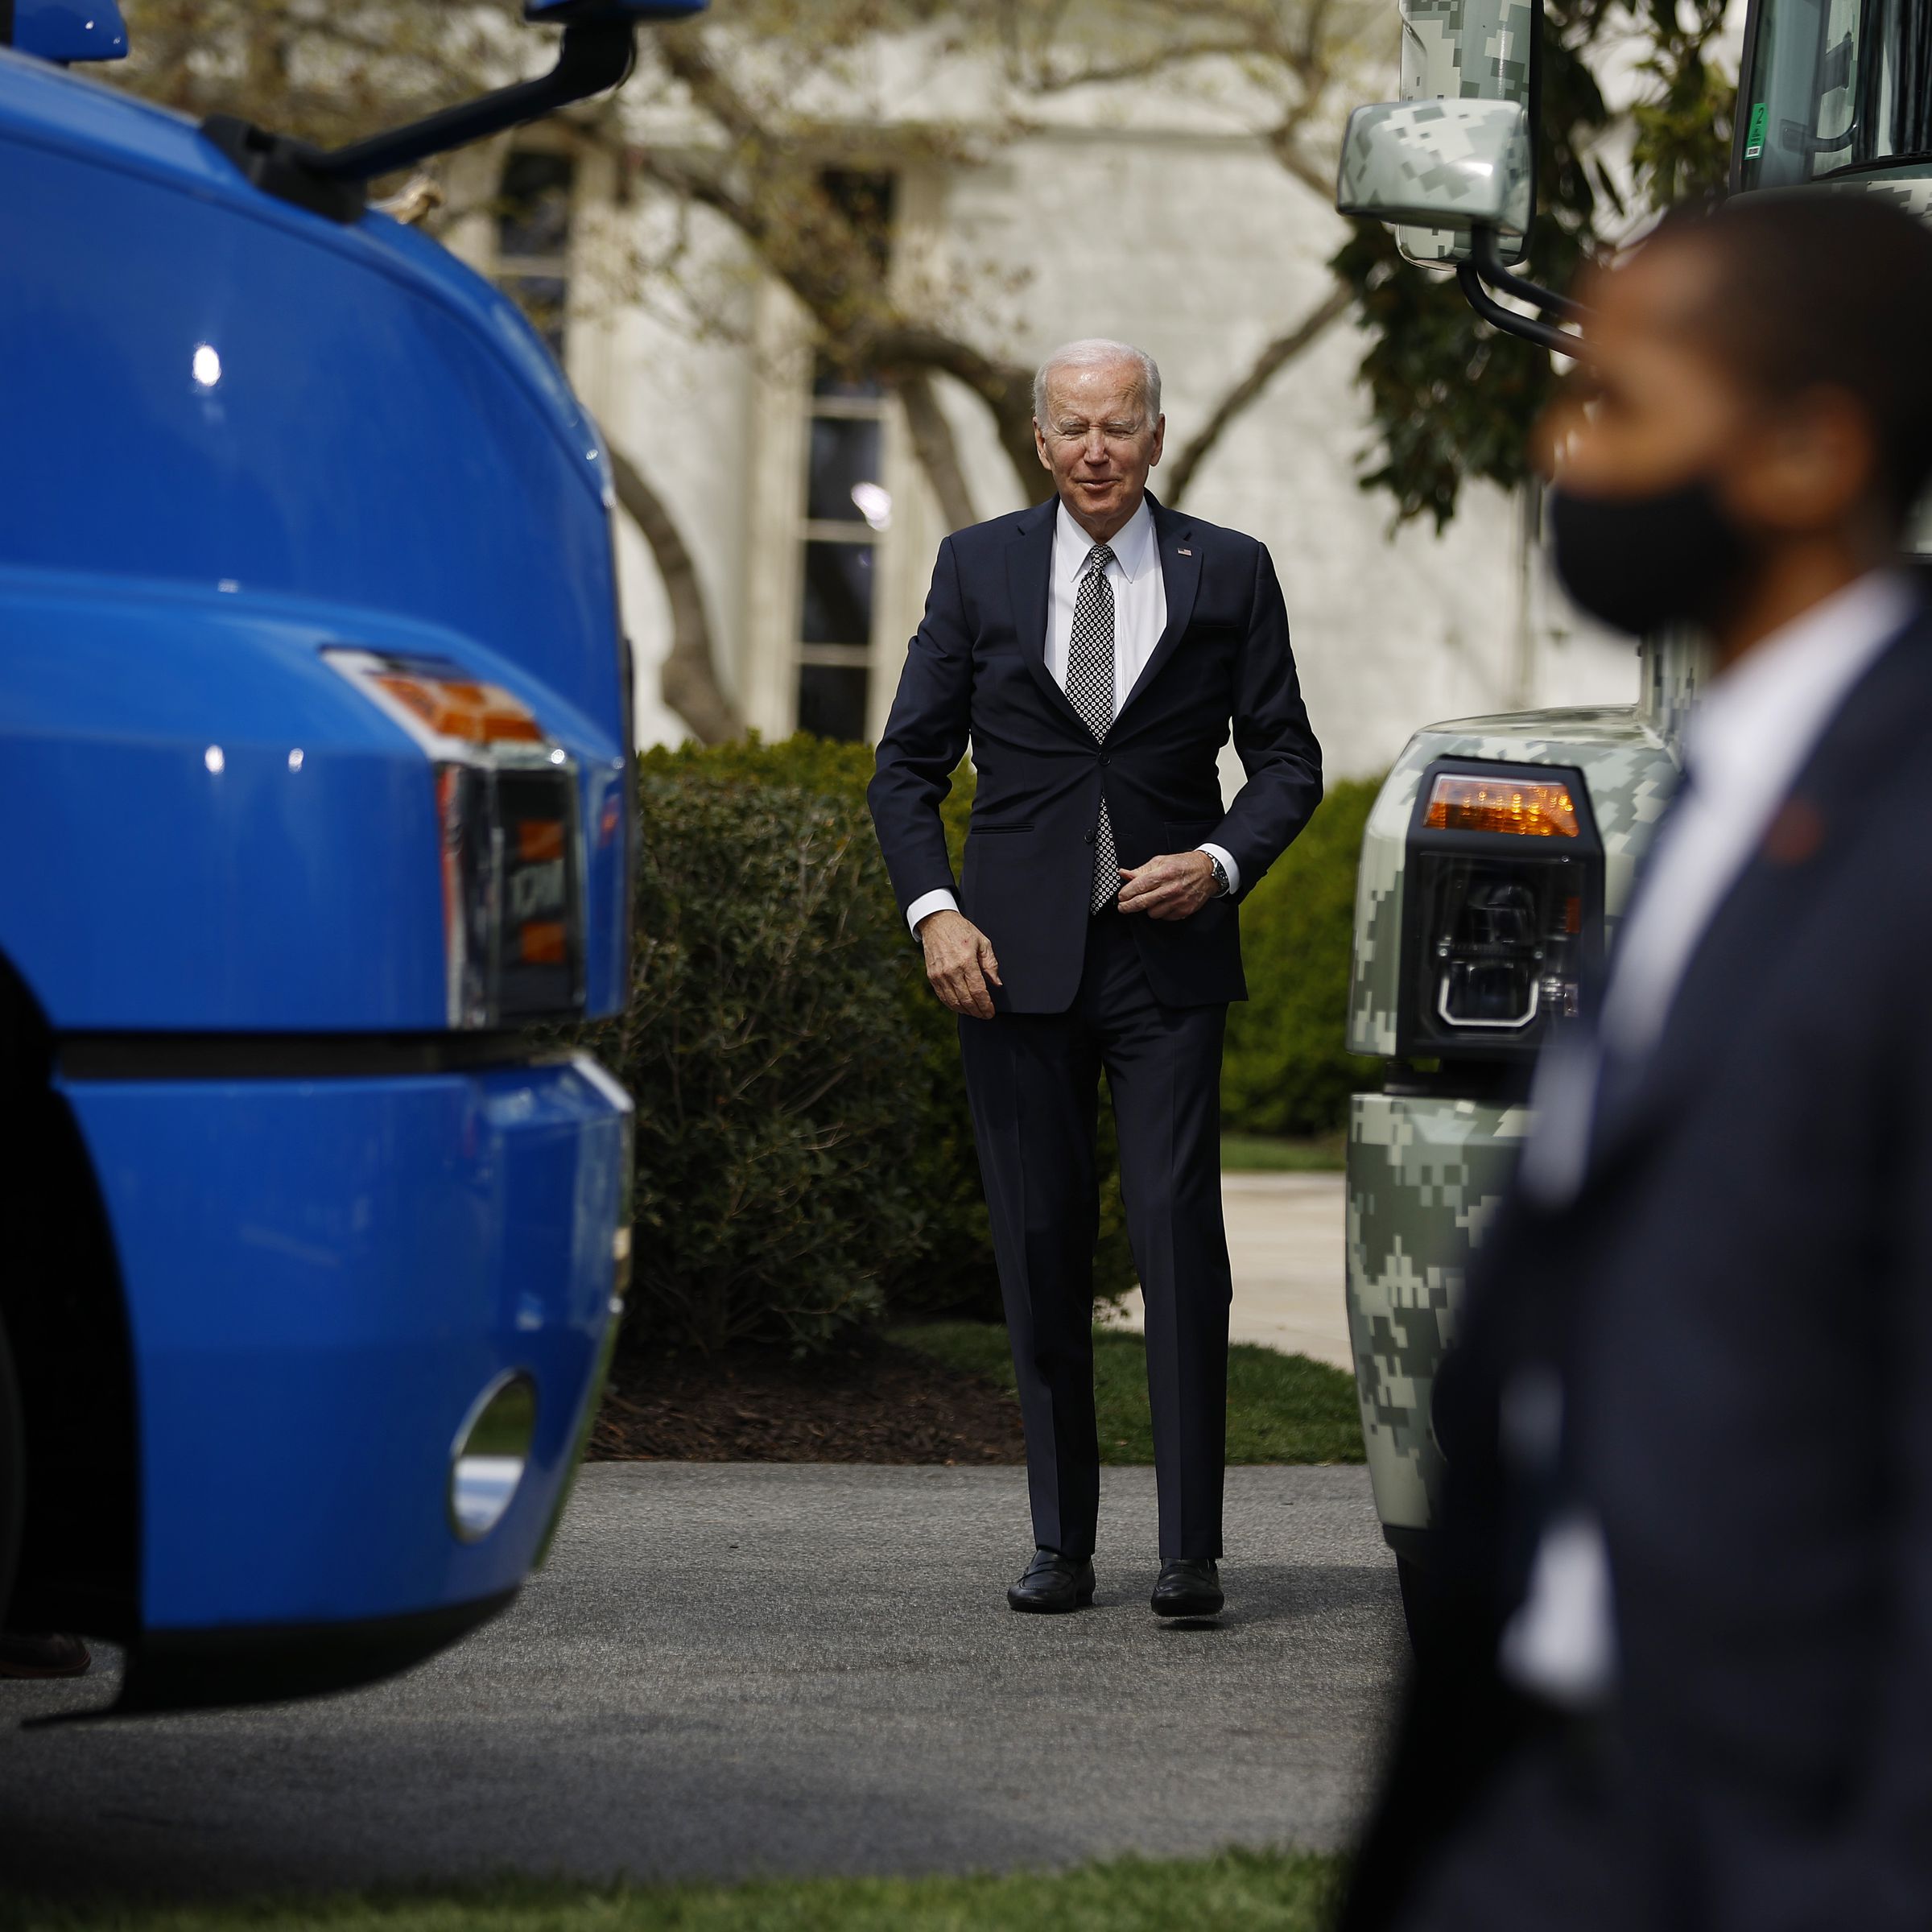 President Biden Delivers Remarks On His Trucking Action Plan To Relieve Supply Chain Issues